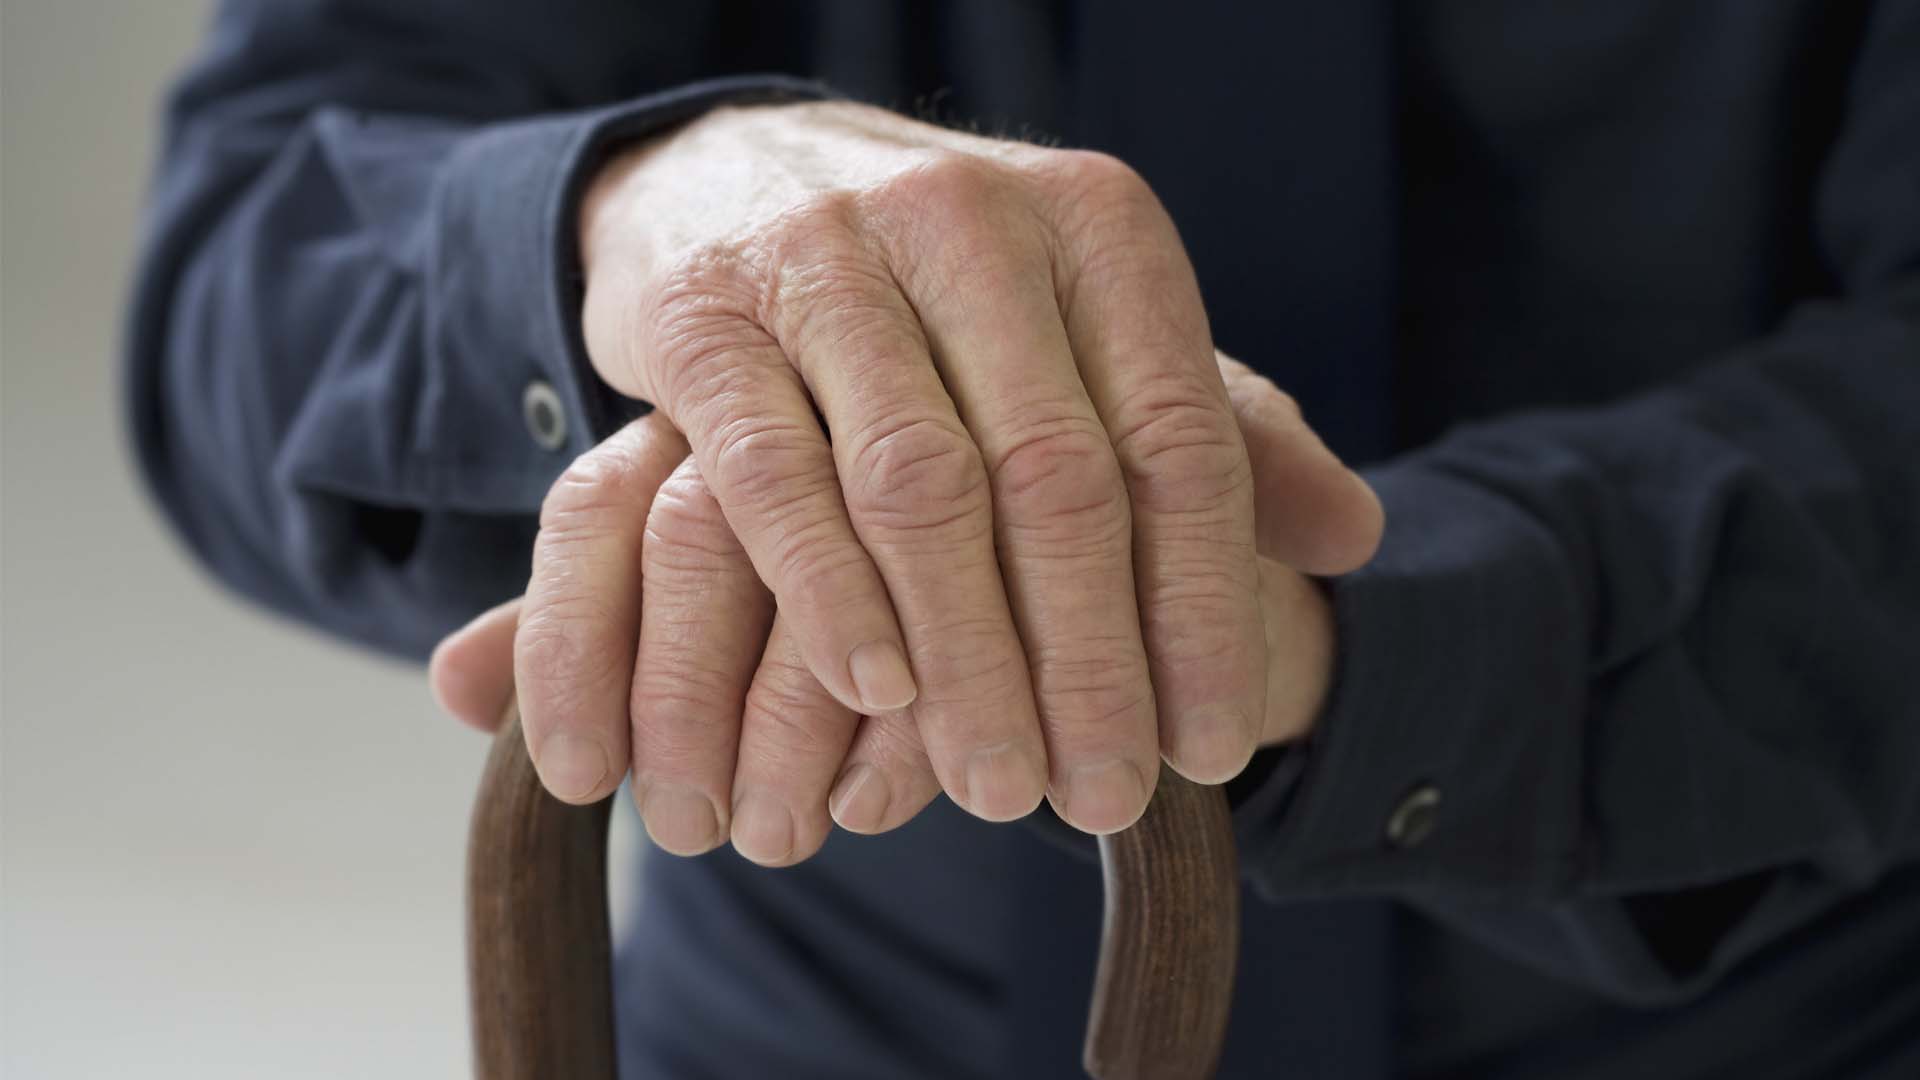 Physical and Mental Problems Linked in Frail Older Adults